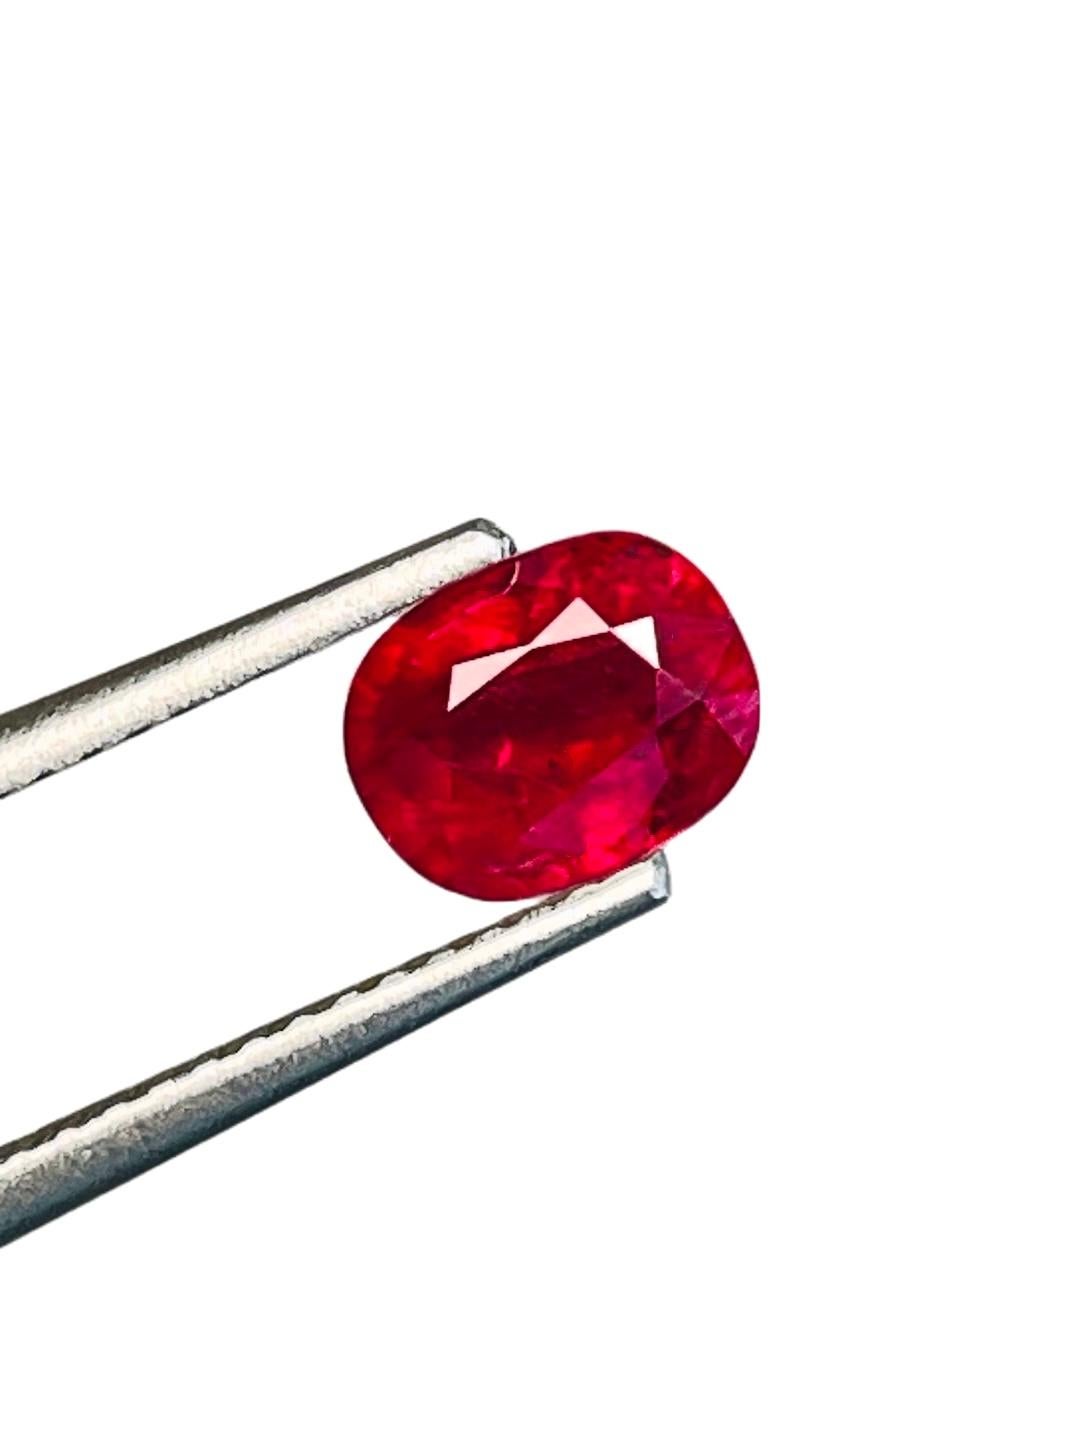 Name: Burma Ruby Unheated 
Weight:1.17ct
Size: 6.53*5.11*4.10mm
Crigin: burma myanmar
Color: pigeon blood color 
Clarity: Eye clean 99% 
Cut : standard cut 
Certificate: GIA 
Design& Creator: WB GEM polishing and selected 
Others：
Translucent